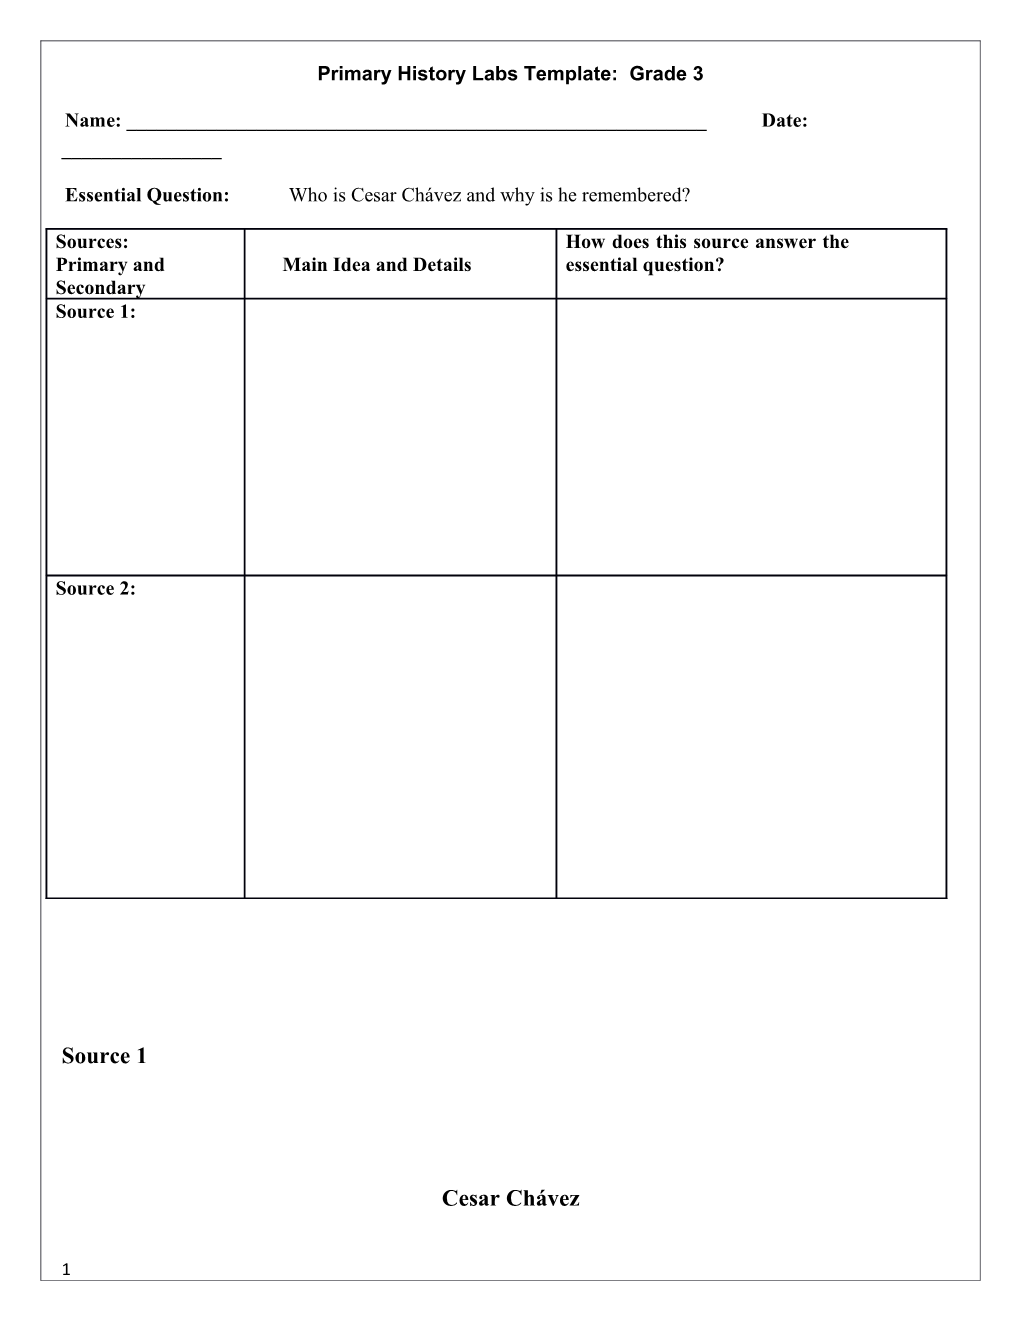 Primary History Labs Template: Grade 3